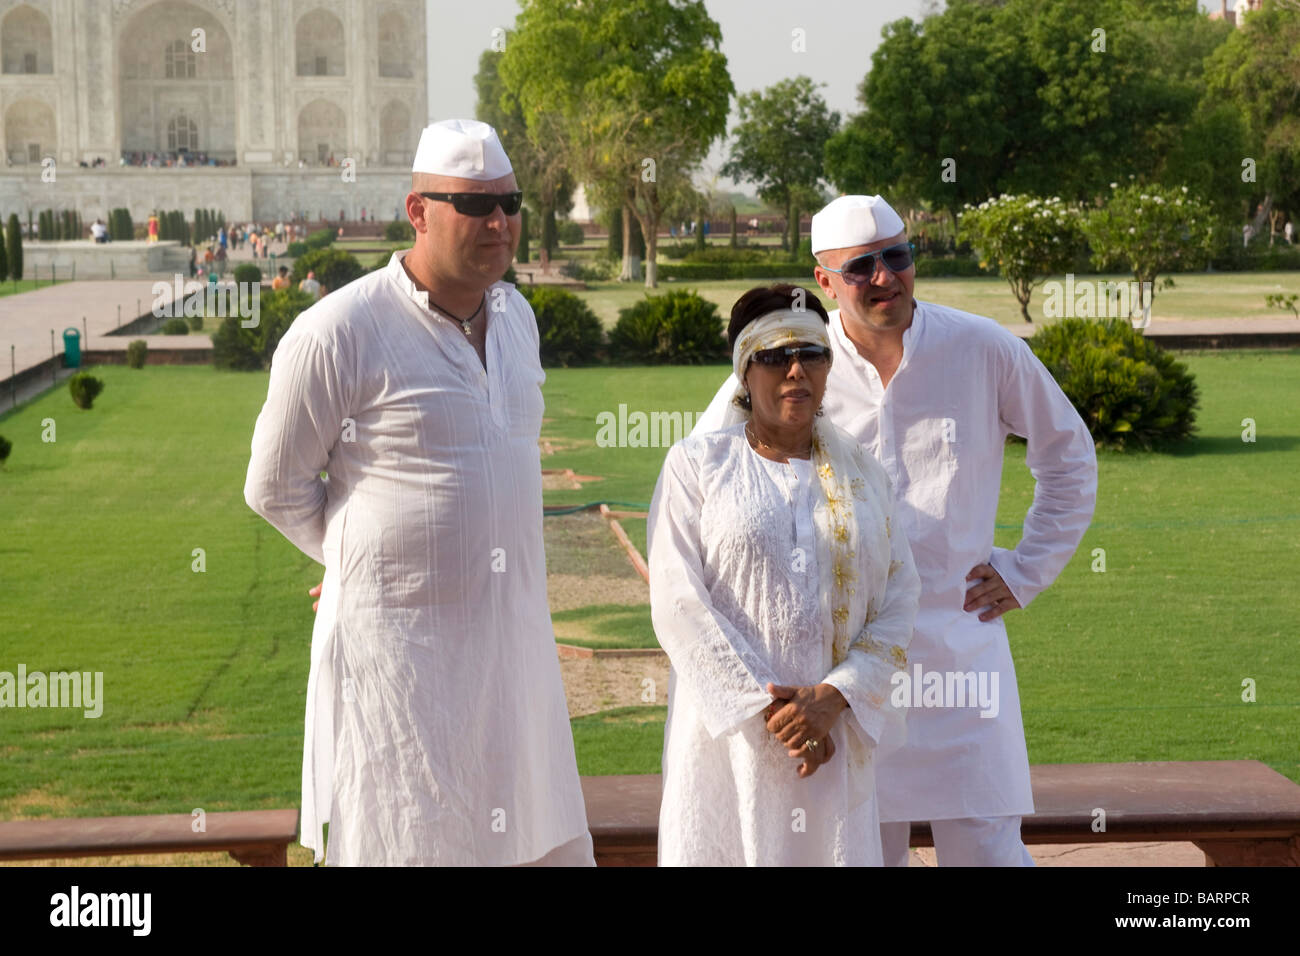 India Agra The Taj Mahal The three Israeli Judges of the Israeli version of American Idol on site scouting for talent Stock Photo